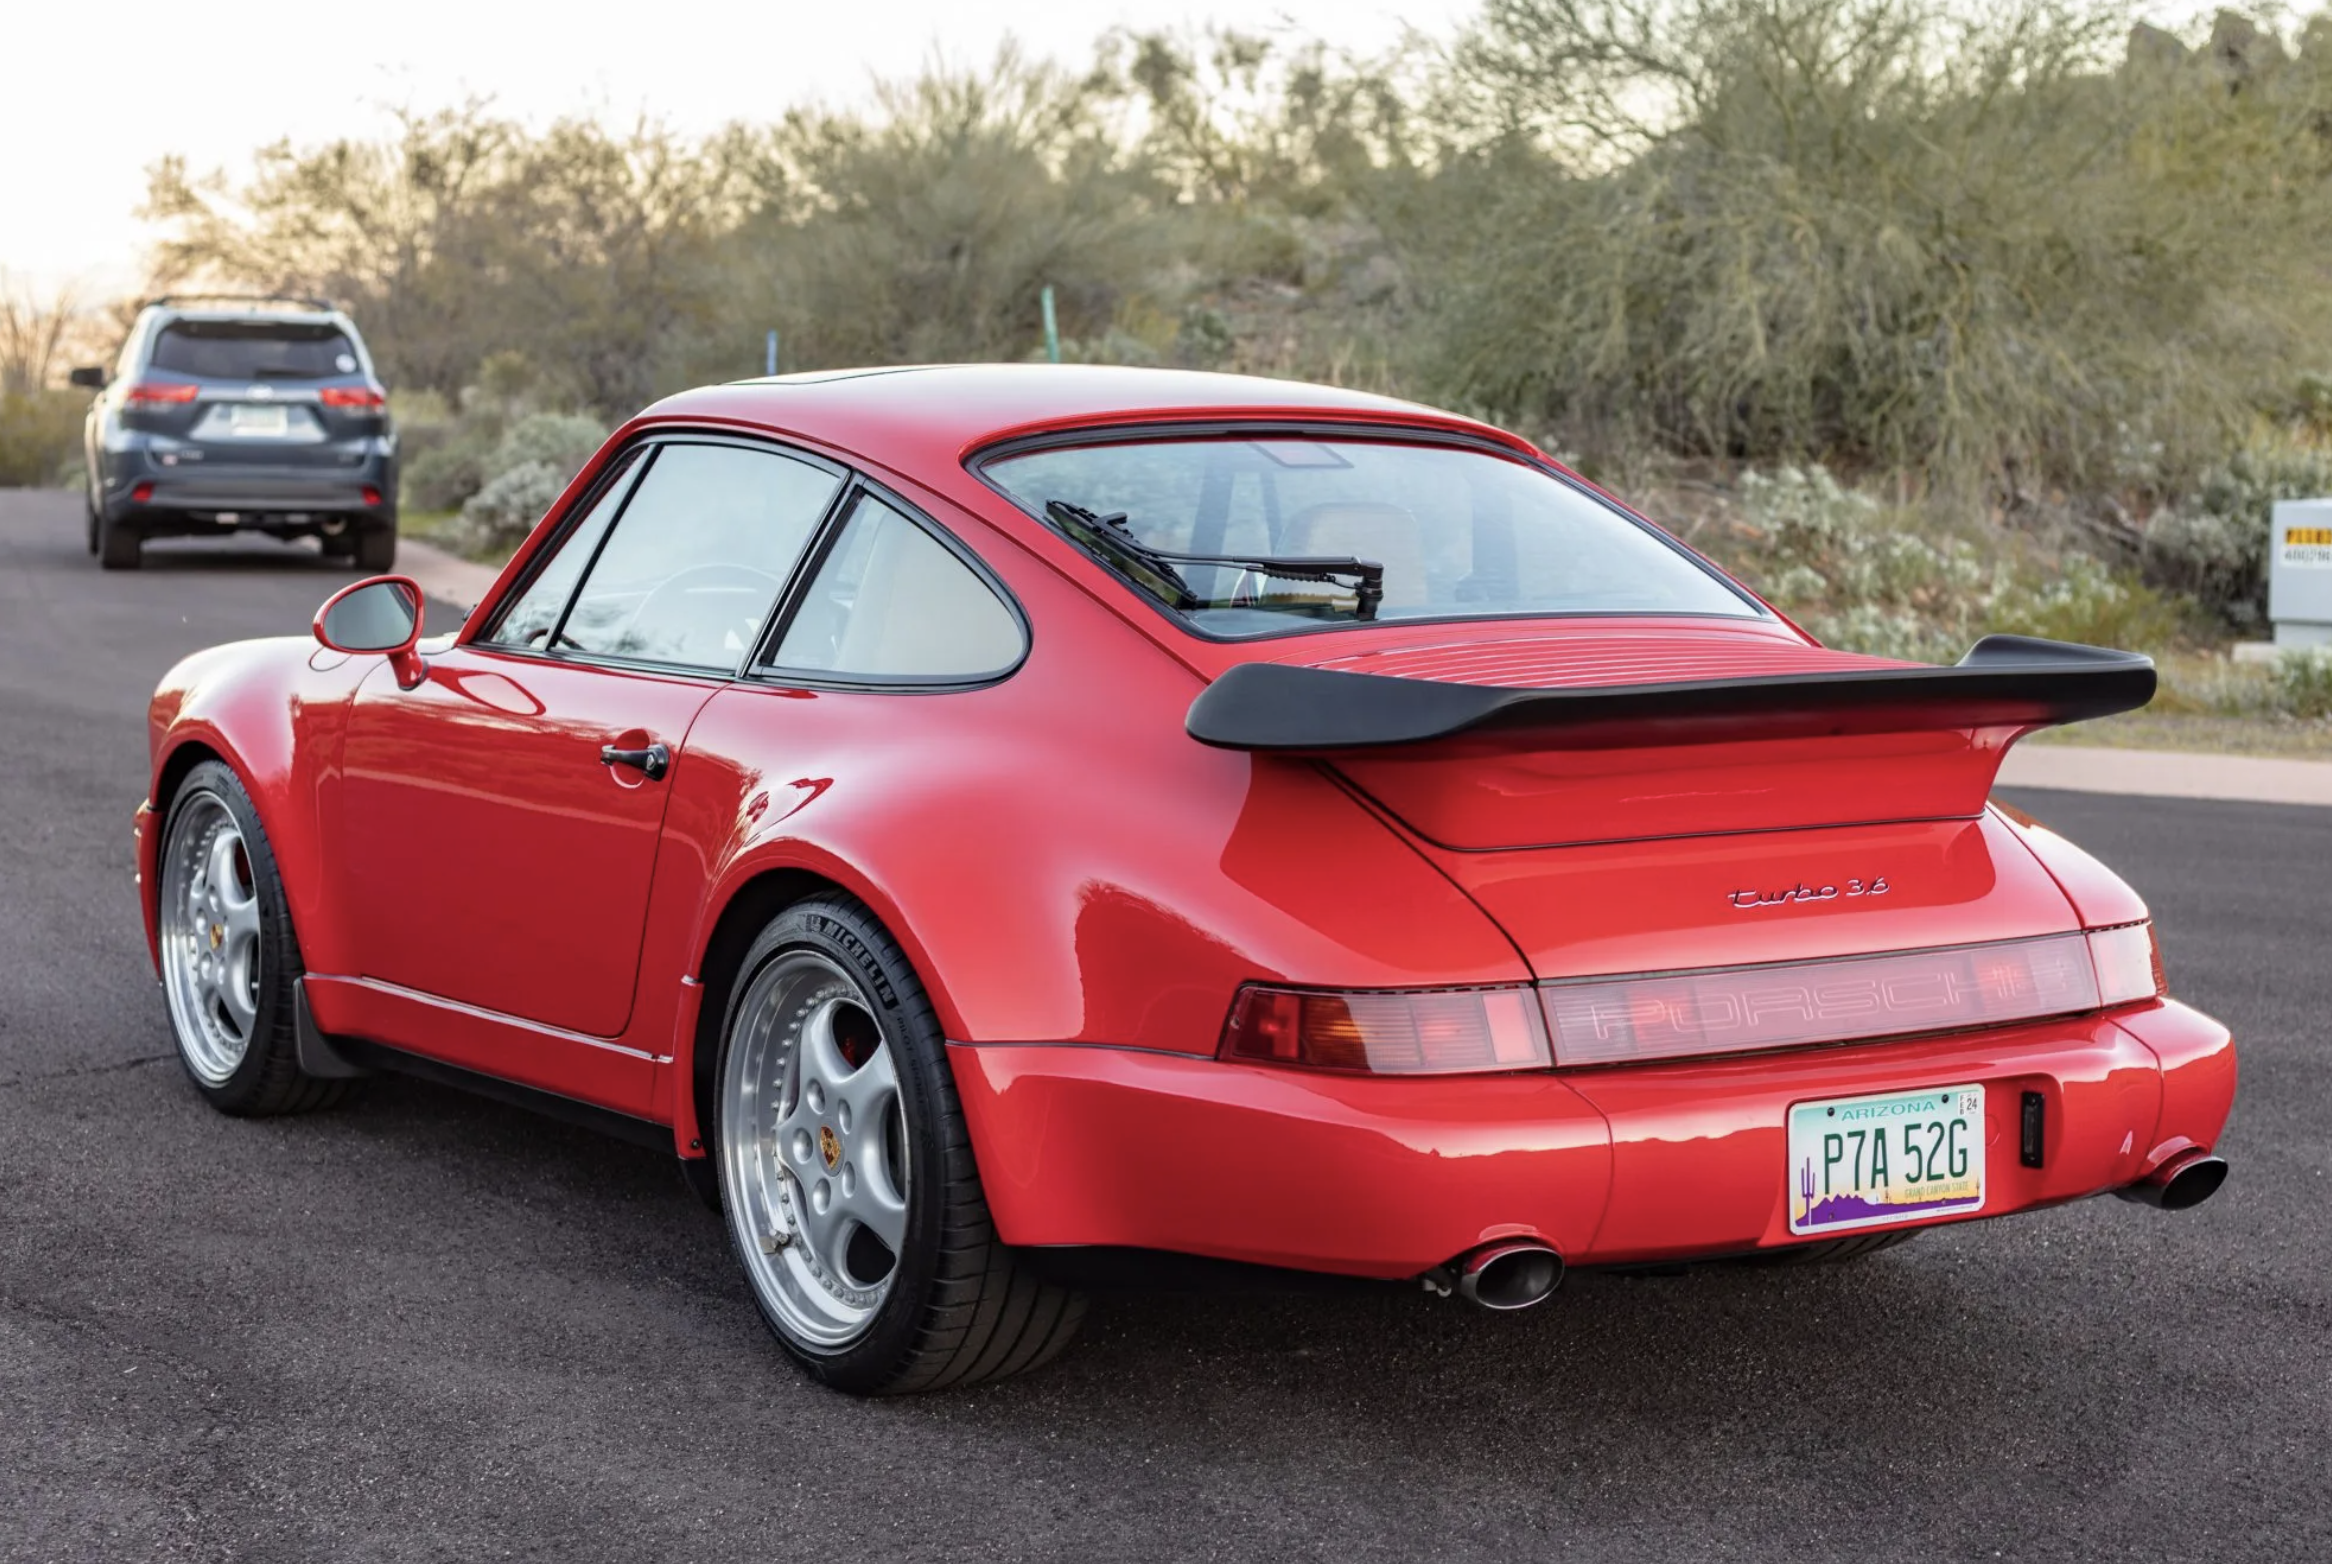 1994 Porsche 911 Turbo  Is Our Bring a Trailer Auction Pick of the Day